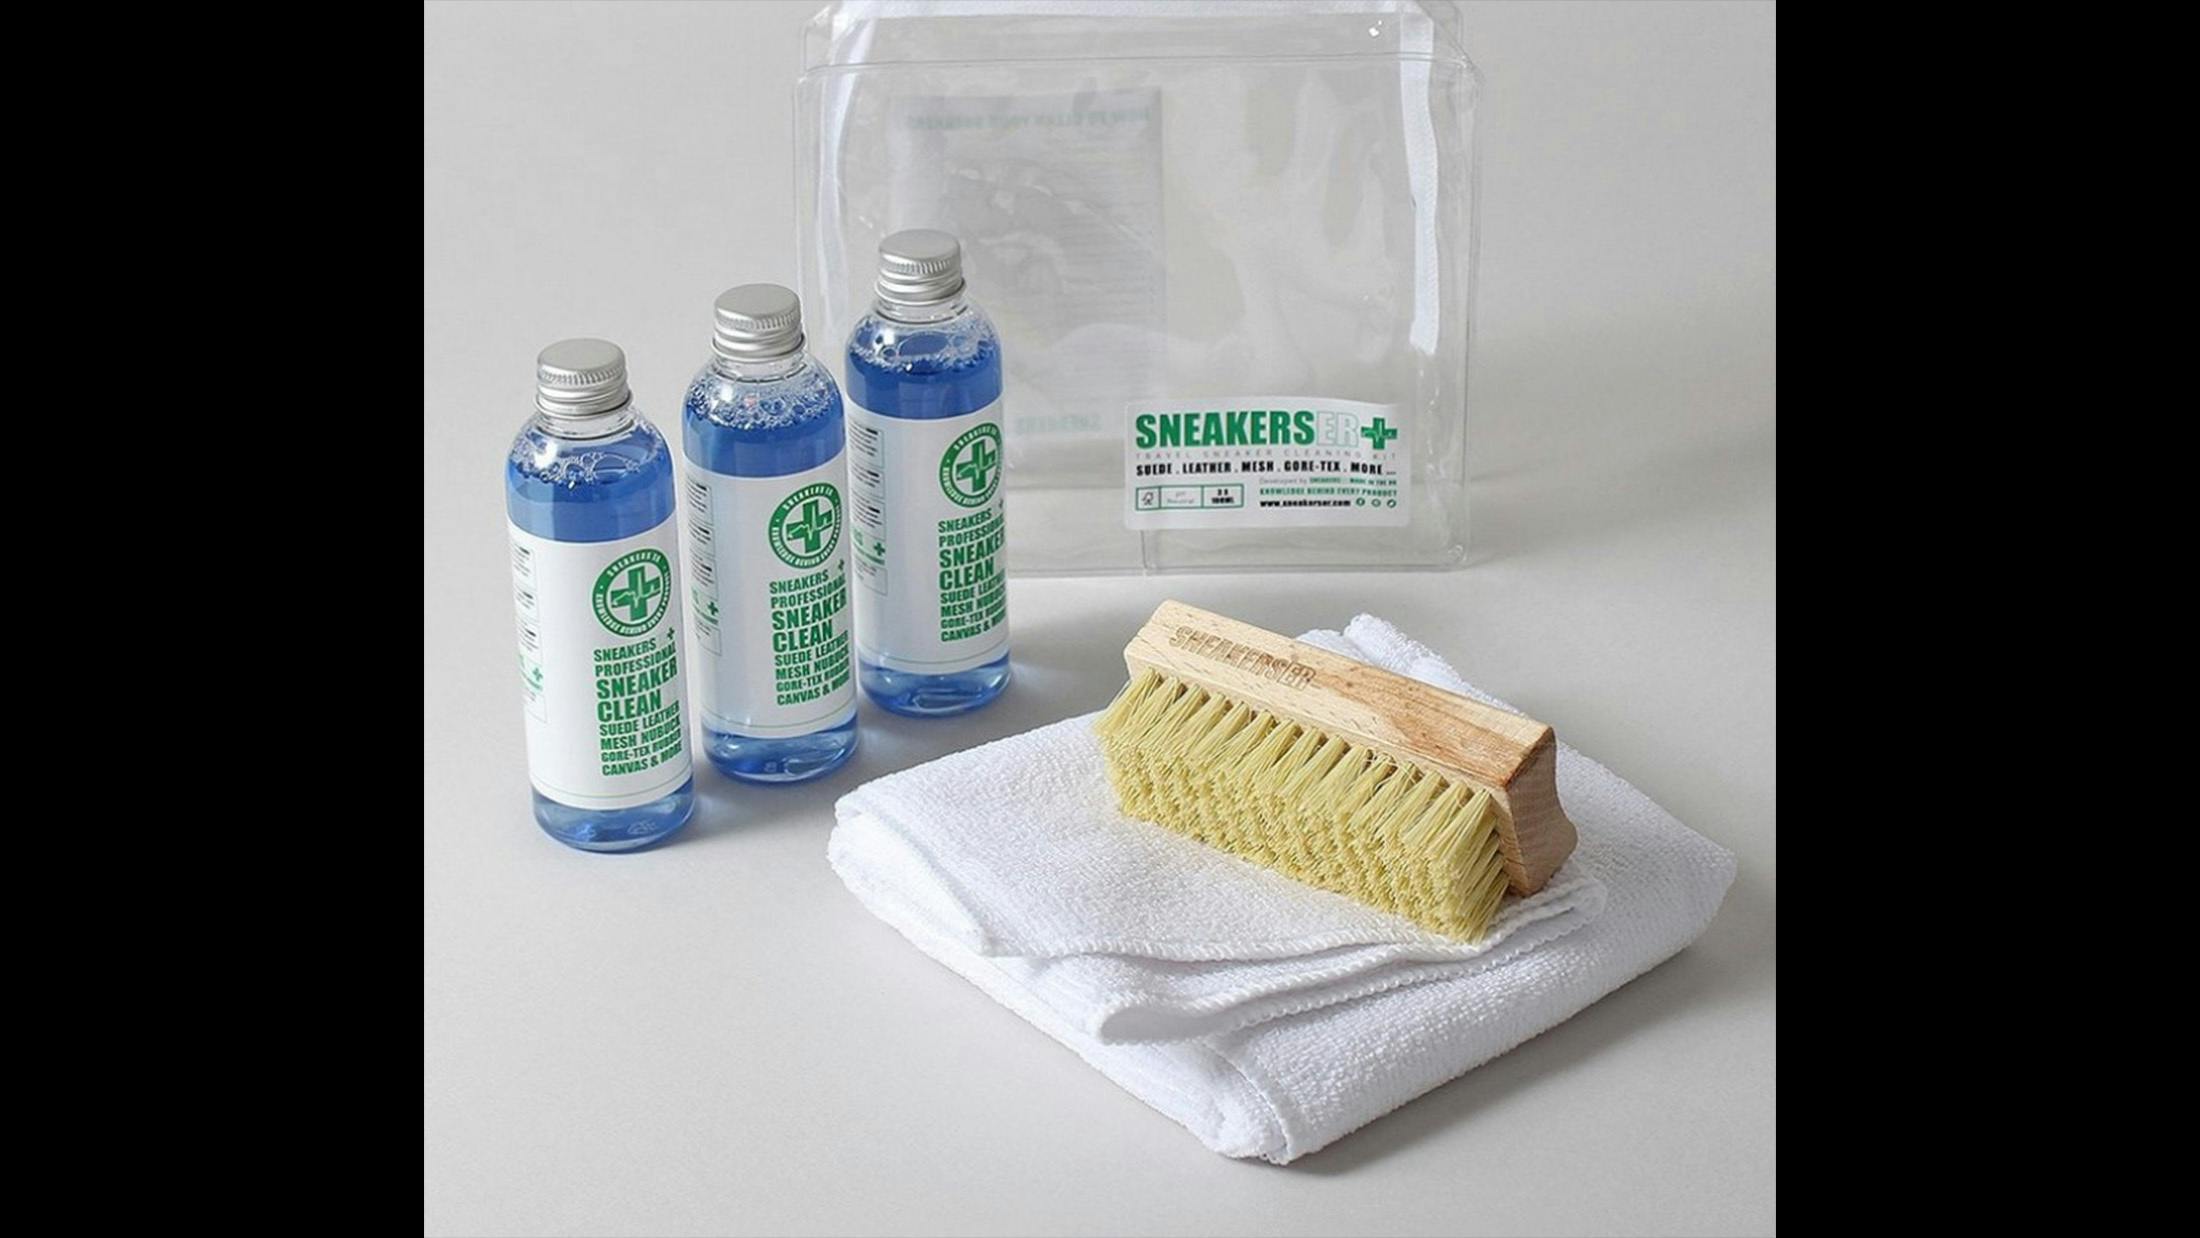 Don’t be the kind of bozo who forks out big money on the latest sneaks only to neglect them. You need the proper kit to keep your prized footwear in good nick. This all-in-one kit will be a lifesaver and a money-saver long term.

£24.95

http://bit.ly/2BopYst